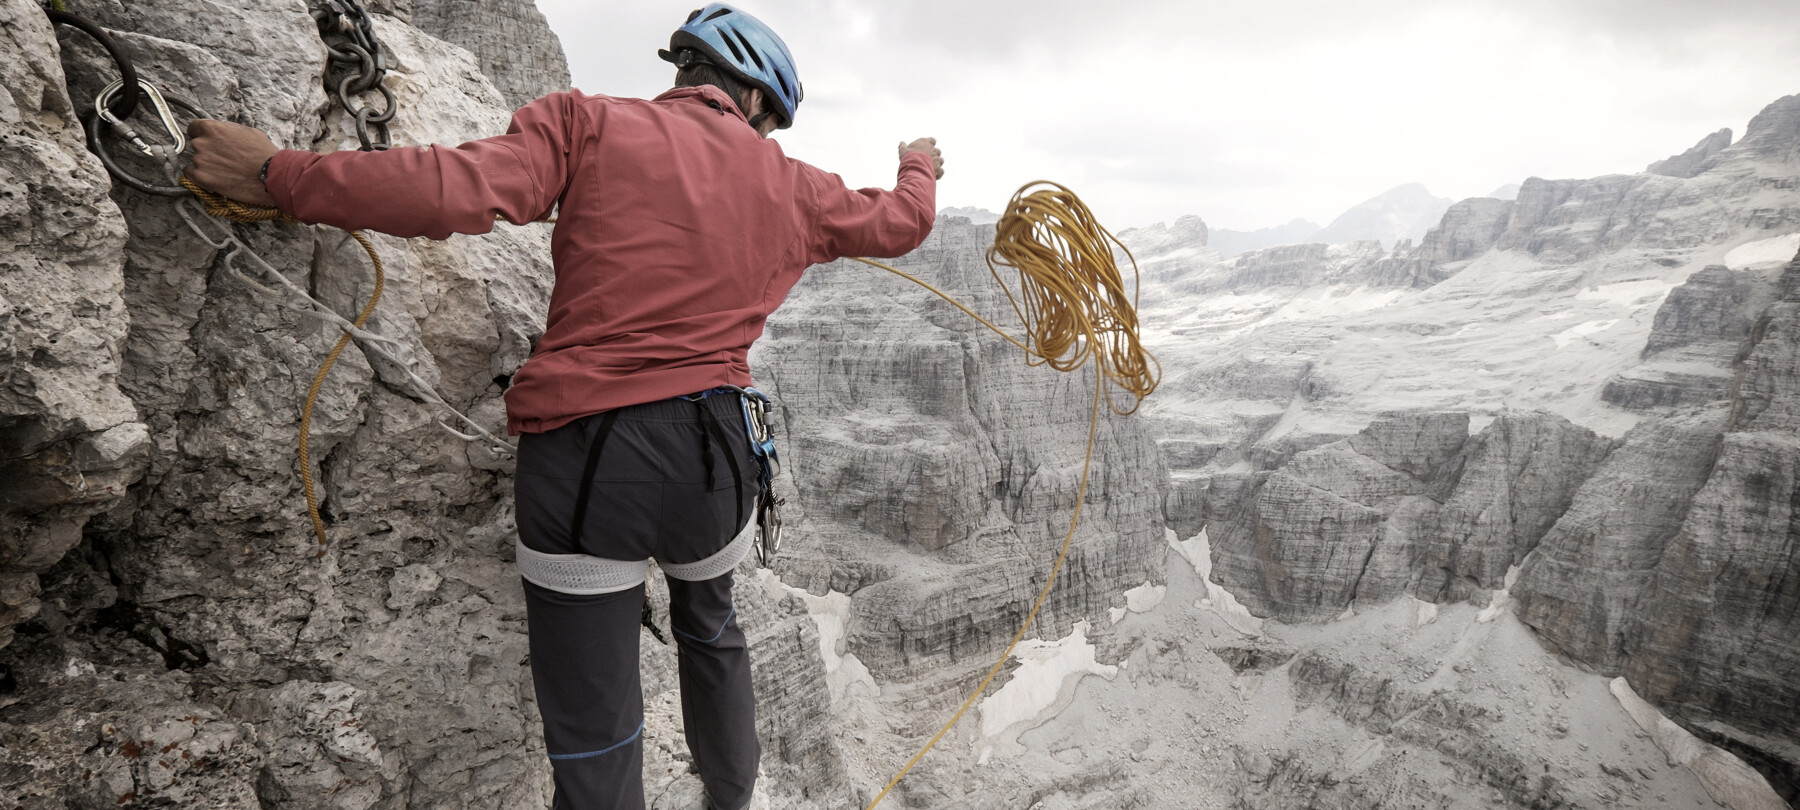 Via delle Normali: the first mountaineers on the Brenta Dolomites